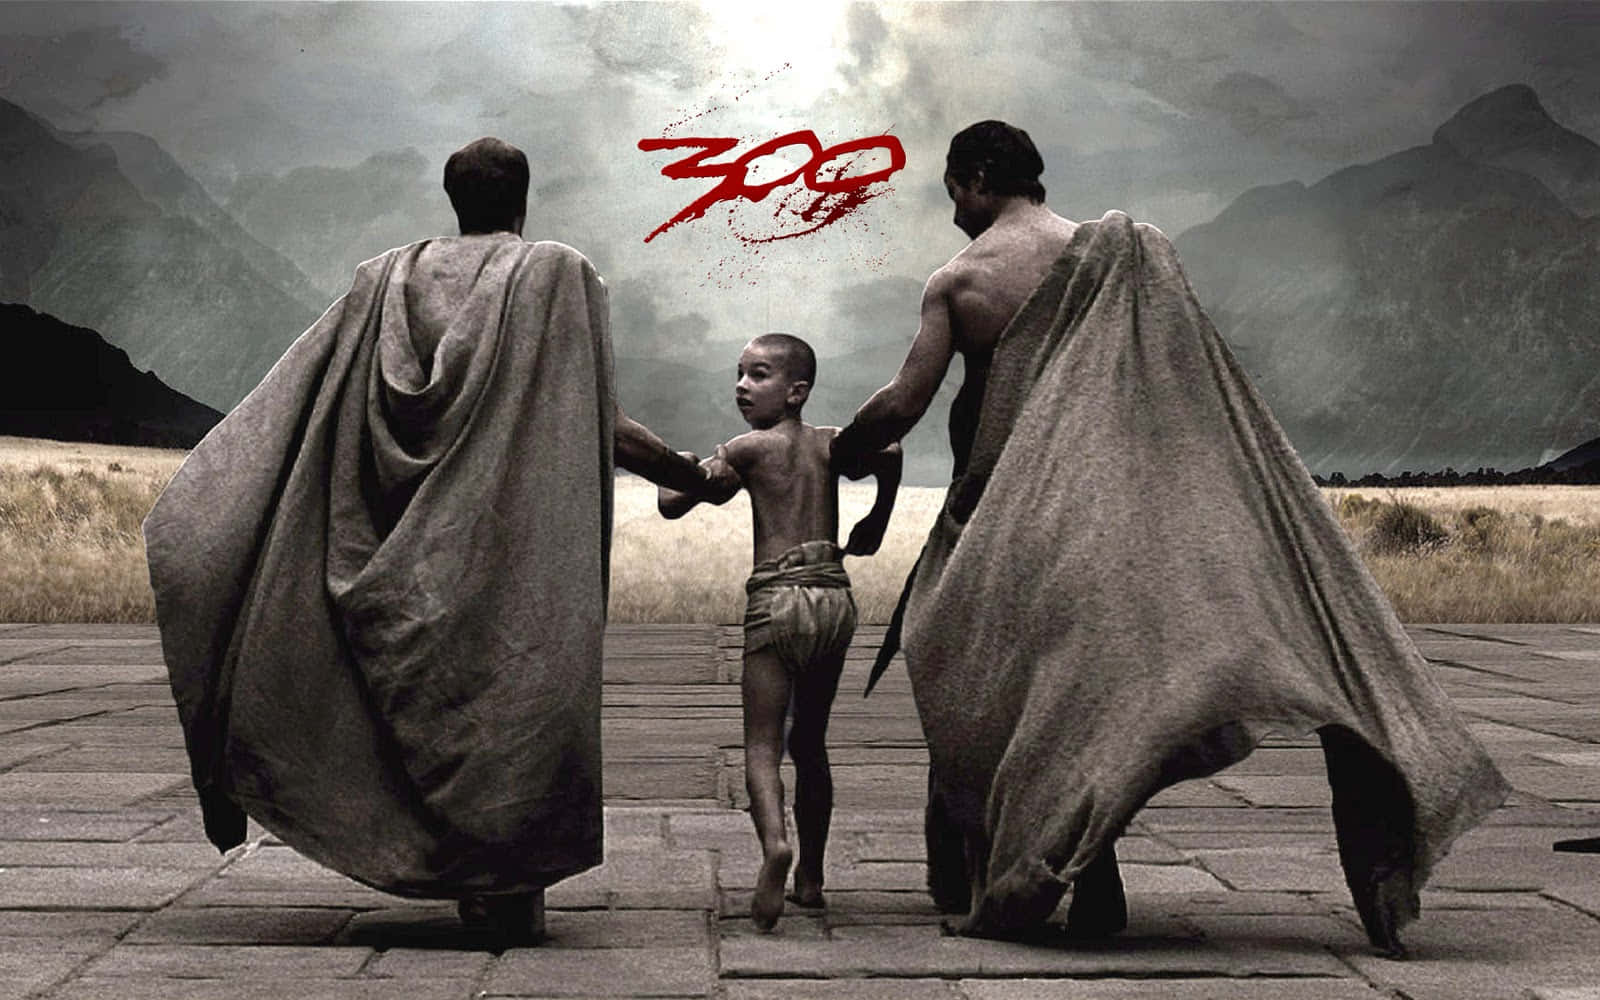 300 Movie Poster With A Child Wallpaper